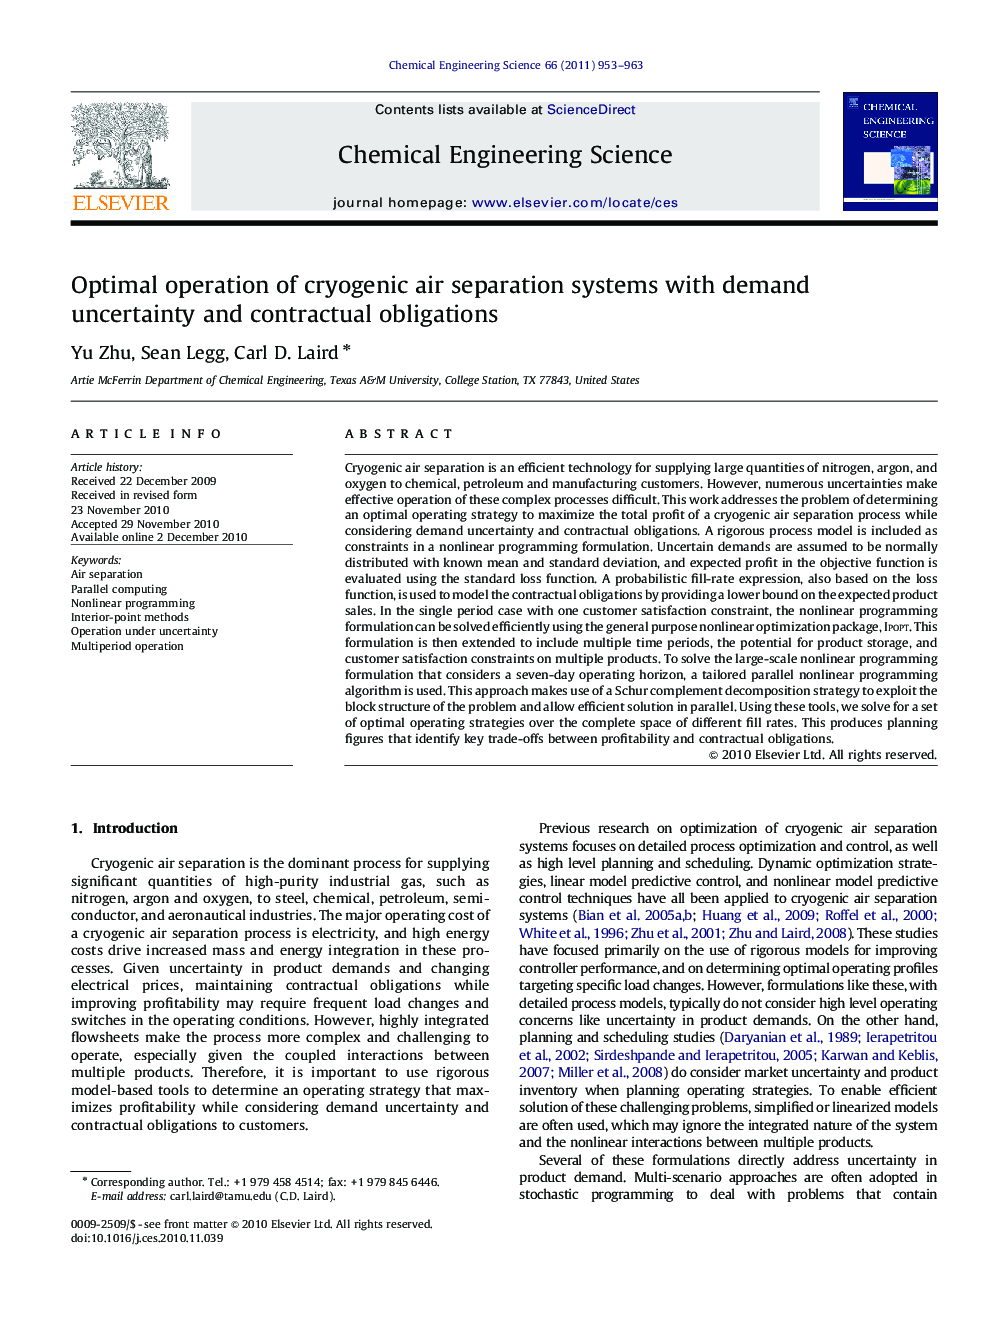 Optimal operation of cryogenic air separation systems with demand uncertainty and contractual obligations